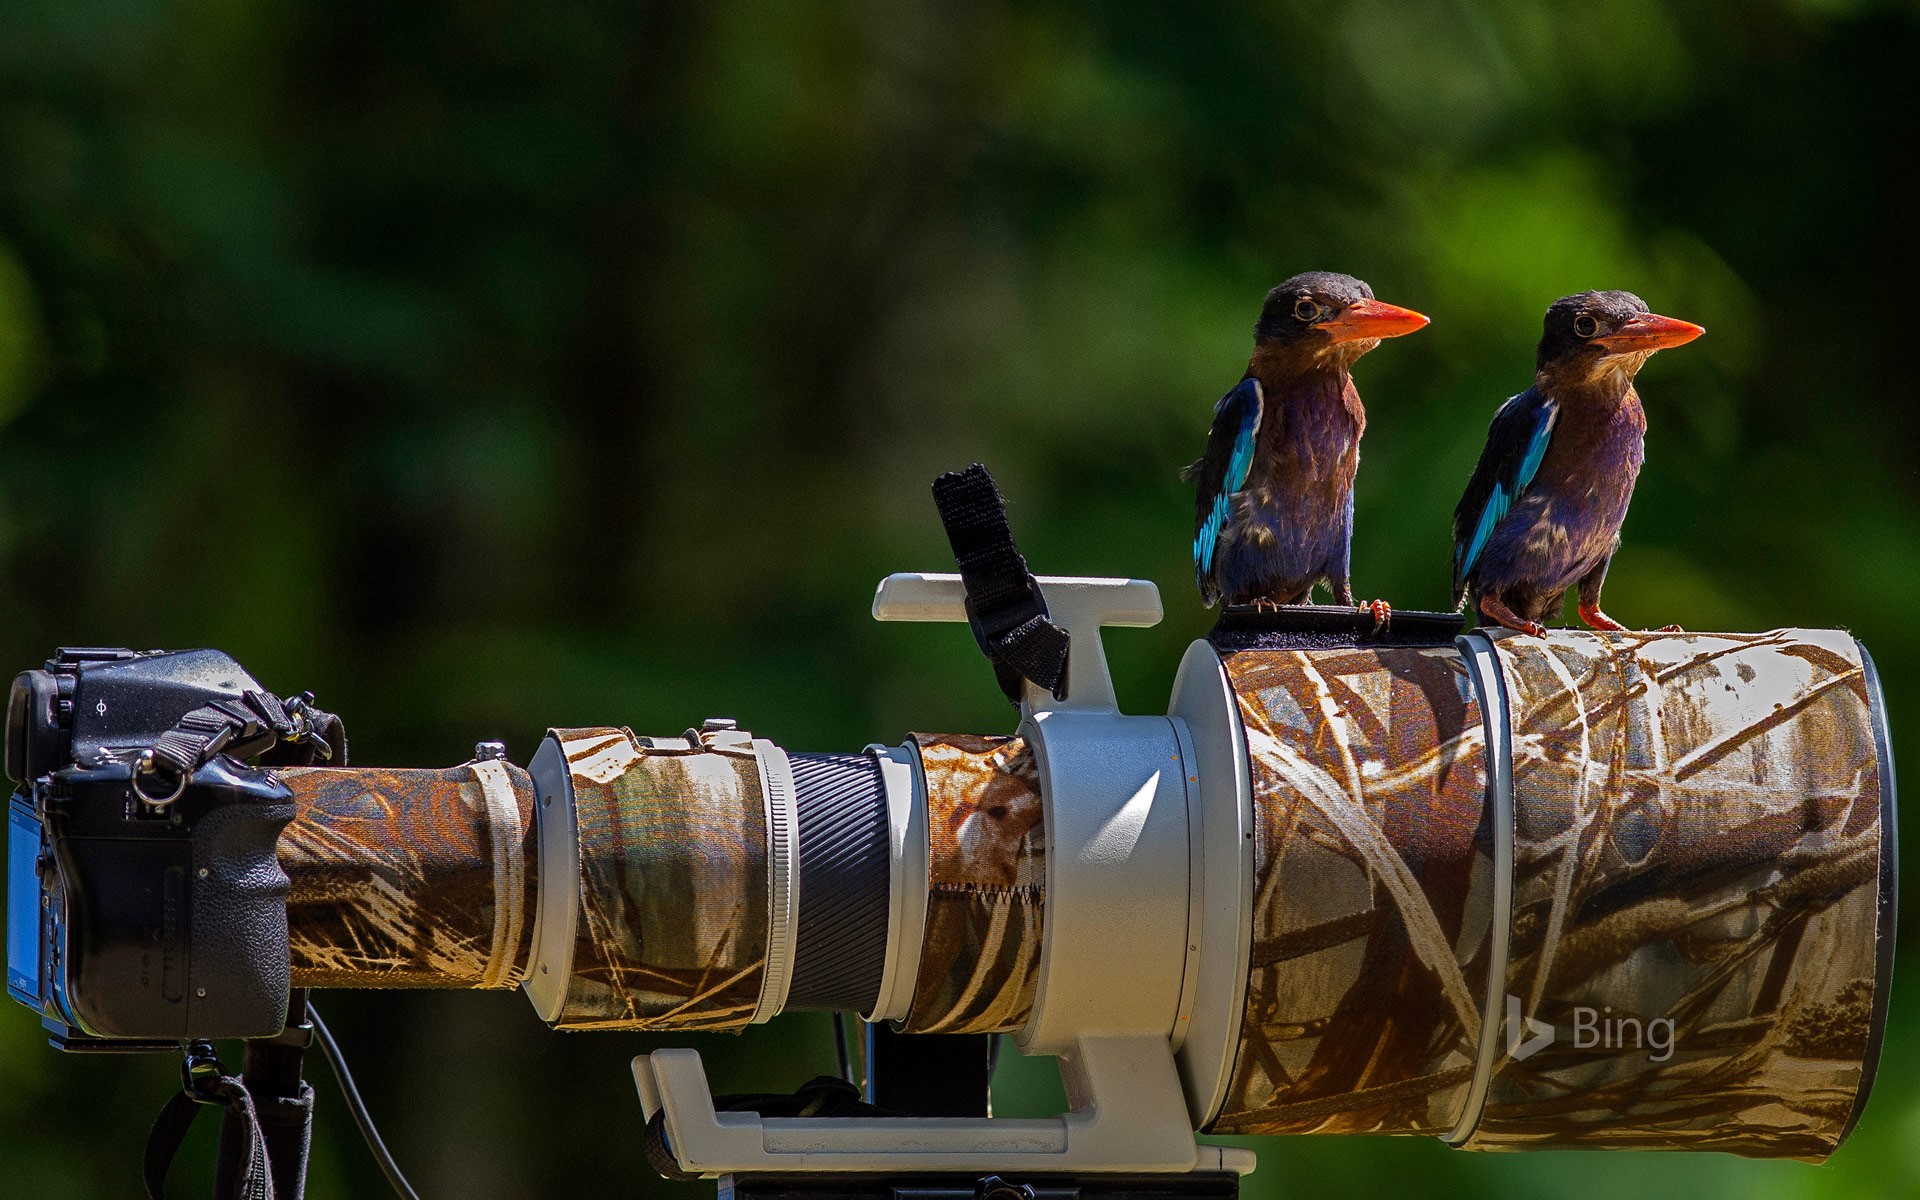 Common kingfishers perched on a camera lens